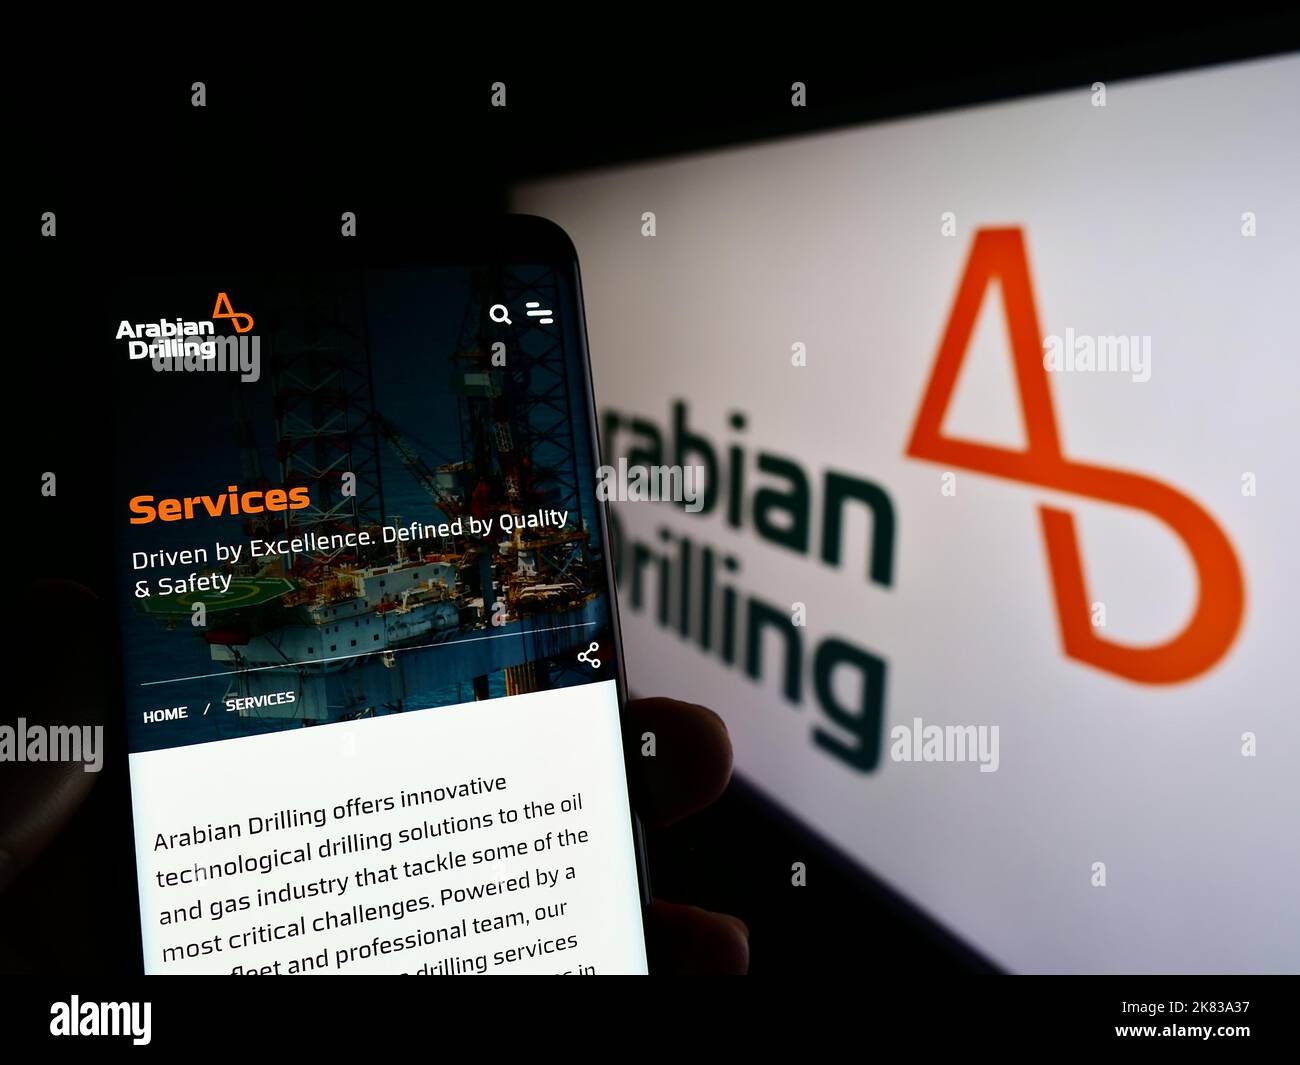 Person holding cellphone with webpage of Saudi business Arabian Drilling Company (ADC) on screen with logo. Focus on center of phone display. Stock Photo